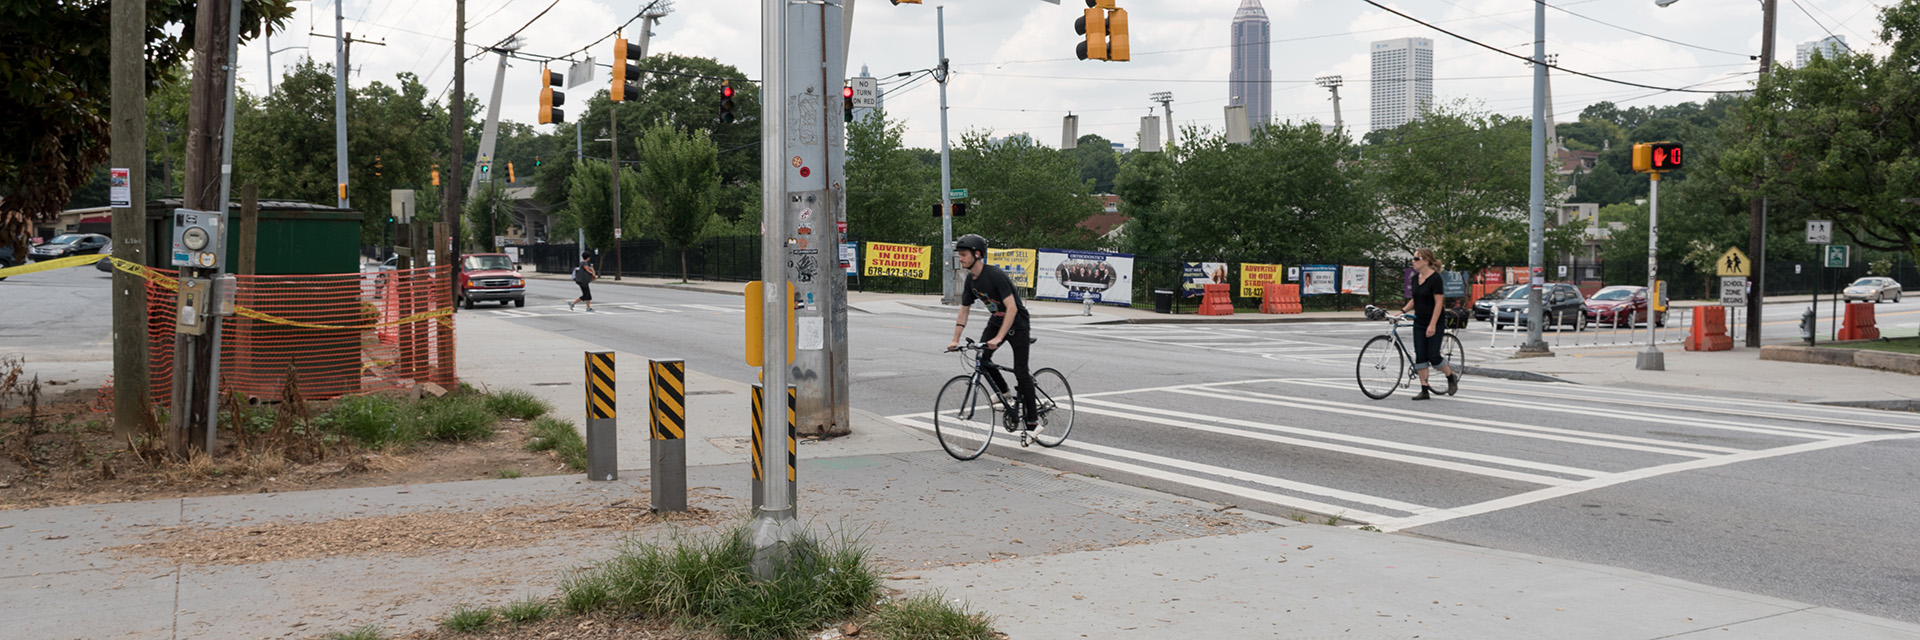 An image of cyclists crossing an urban intersection.